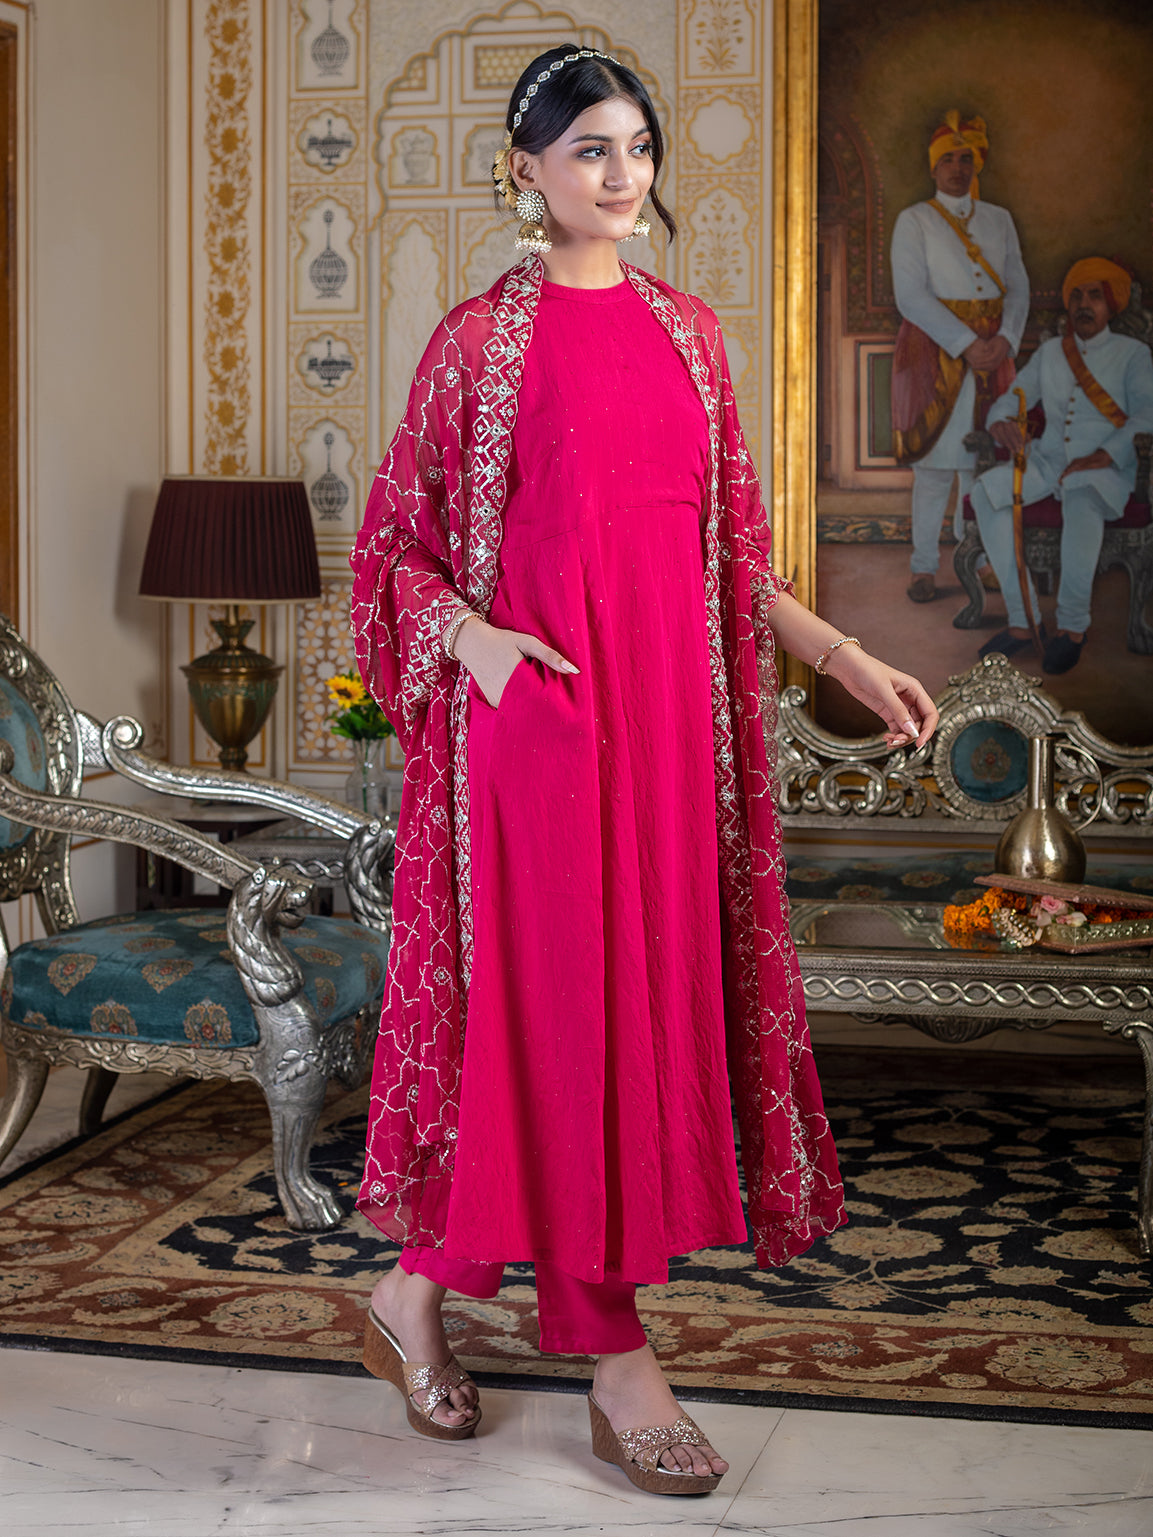 elevate-your-style-with-our-pink-halter-neck-kurta-set-paired-with-a-stunning-sequin-embroidered-dupatta-effortless-glam-and-grace-in-one-ensemble